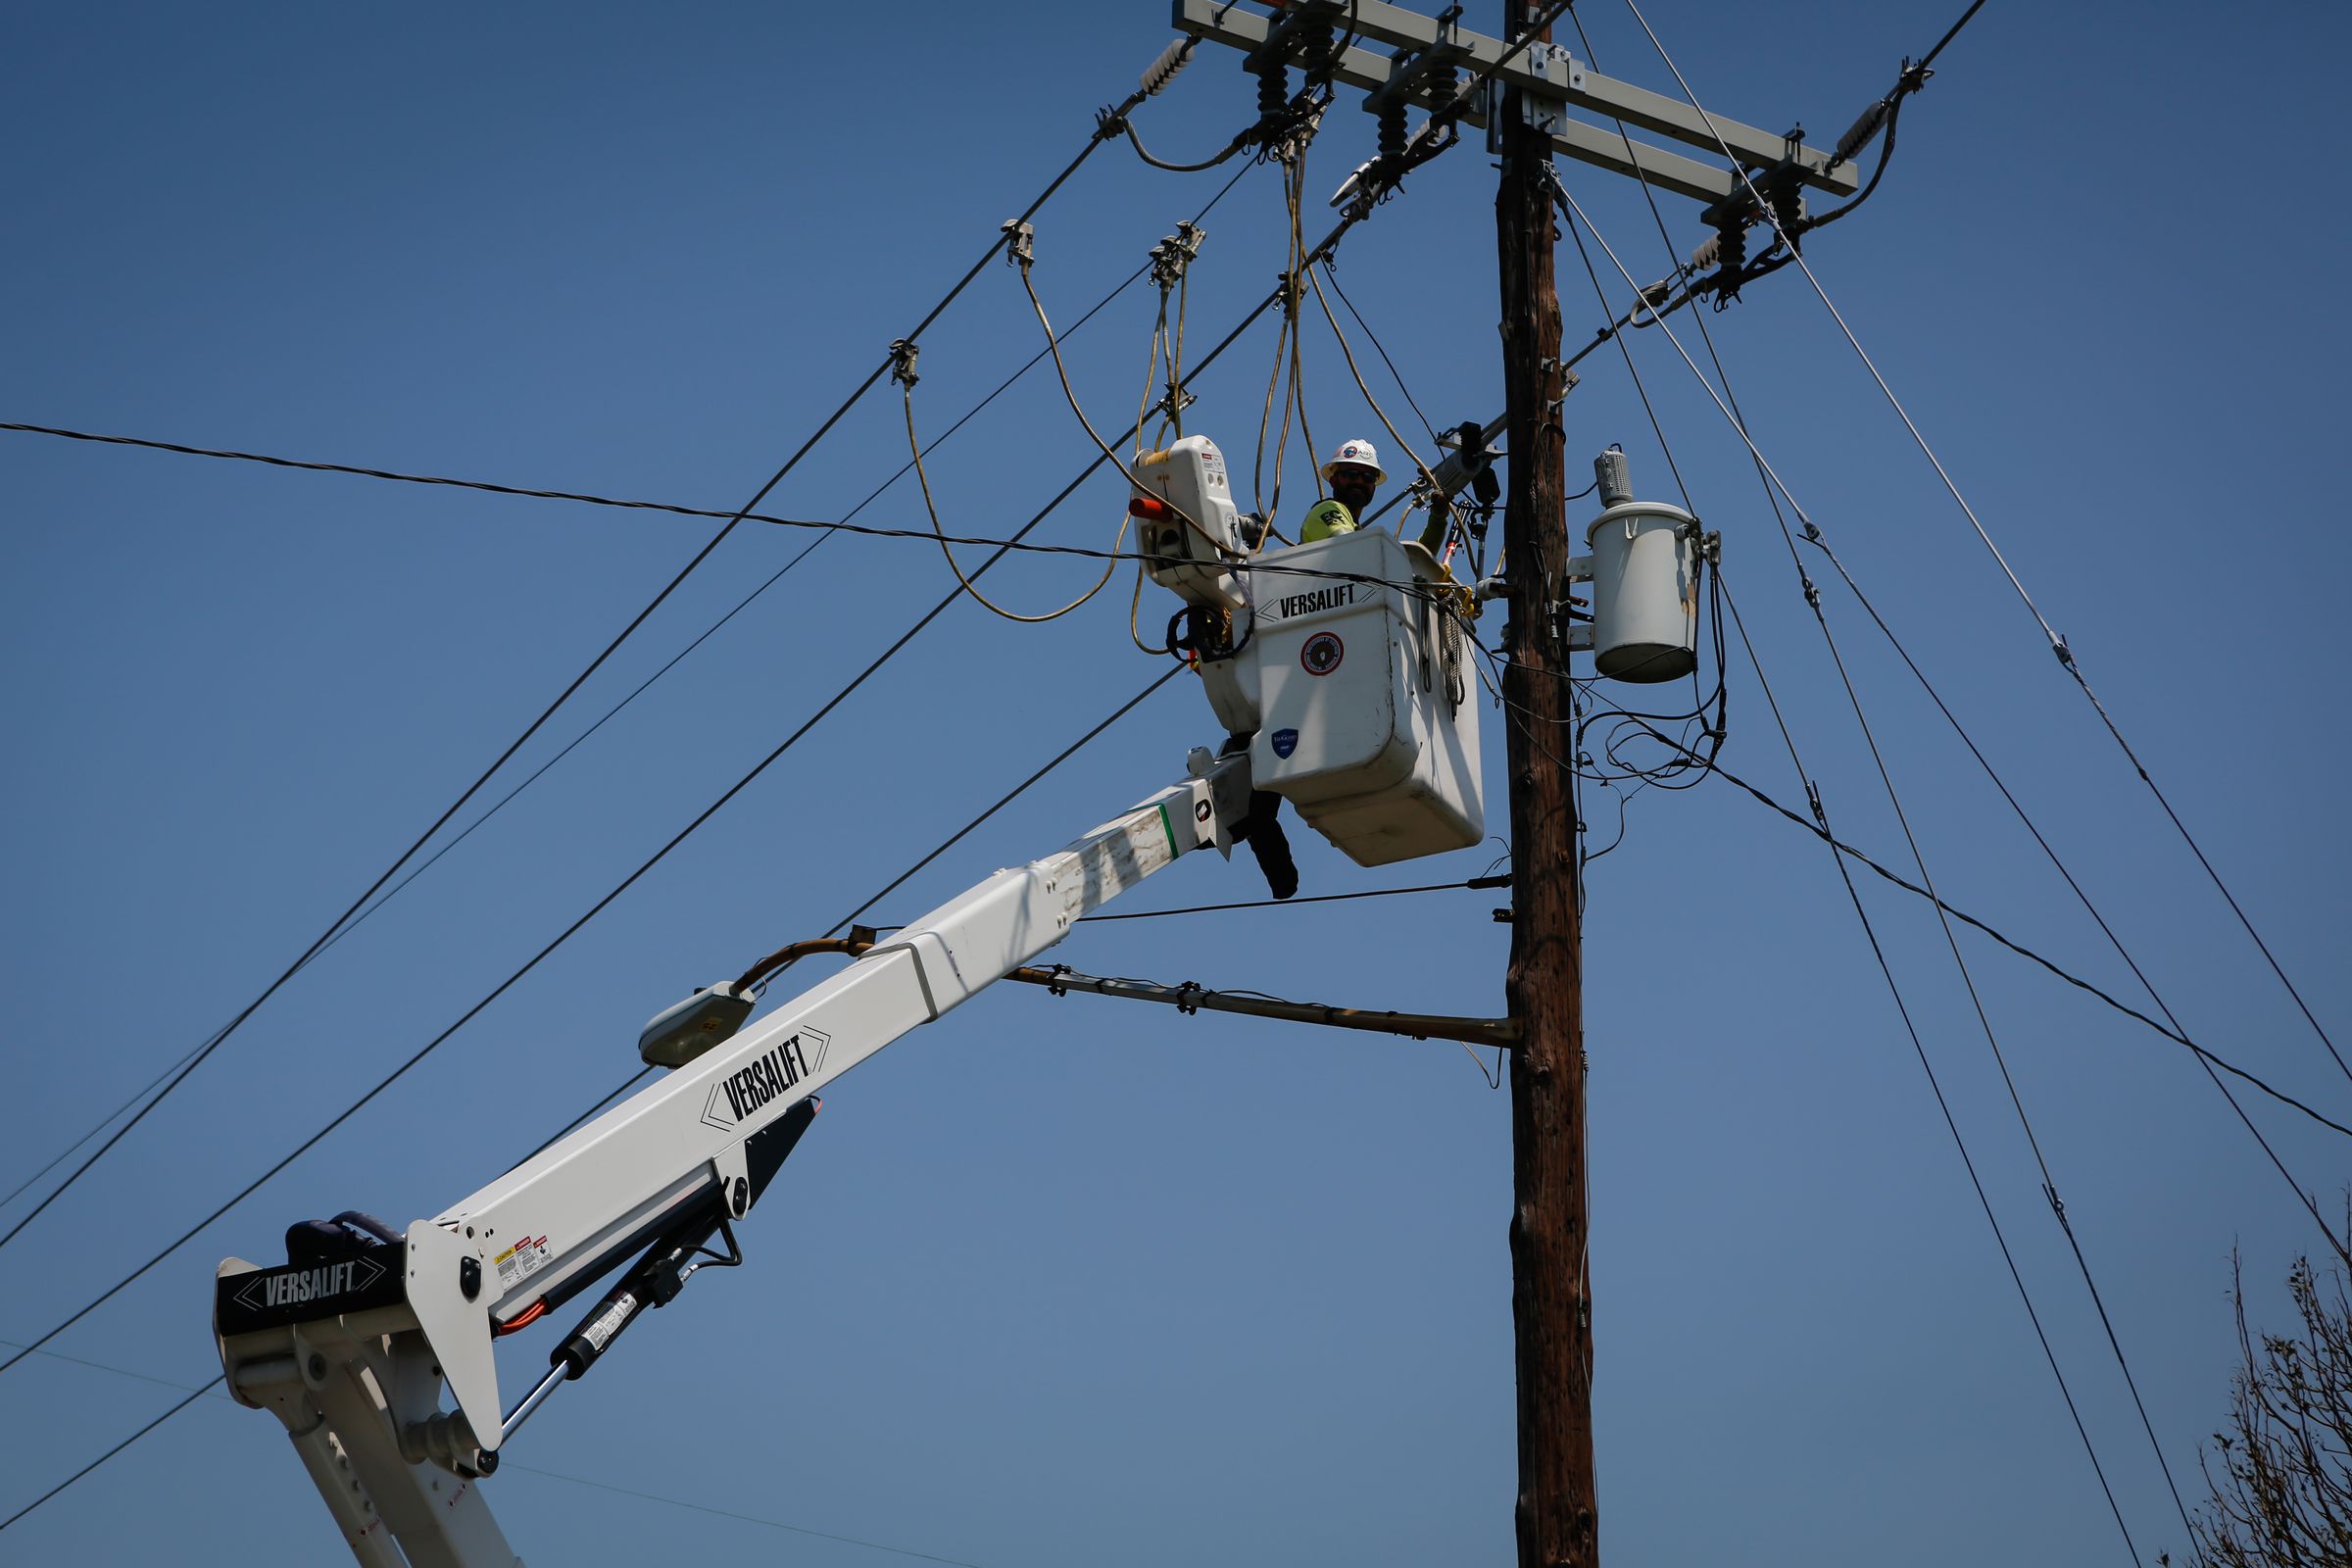 A worker repairs a utility pole during a power outage after Hurricane Ida in New Orleans, Louisiana, U.S., on Thursday, September 2nd, 2021.